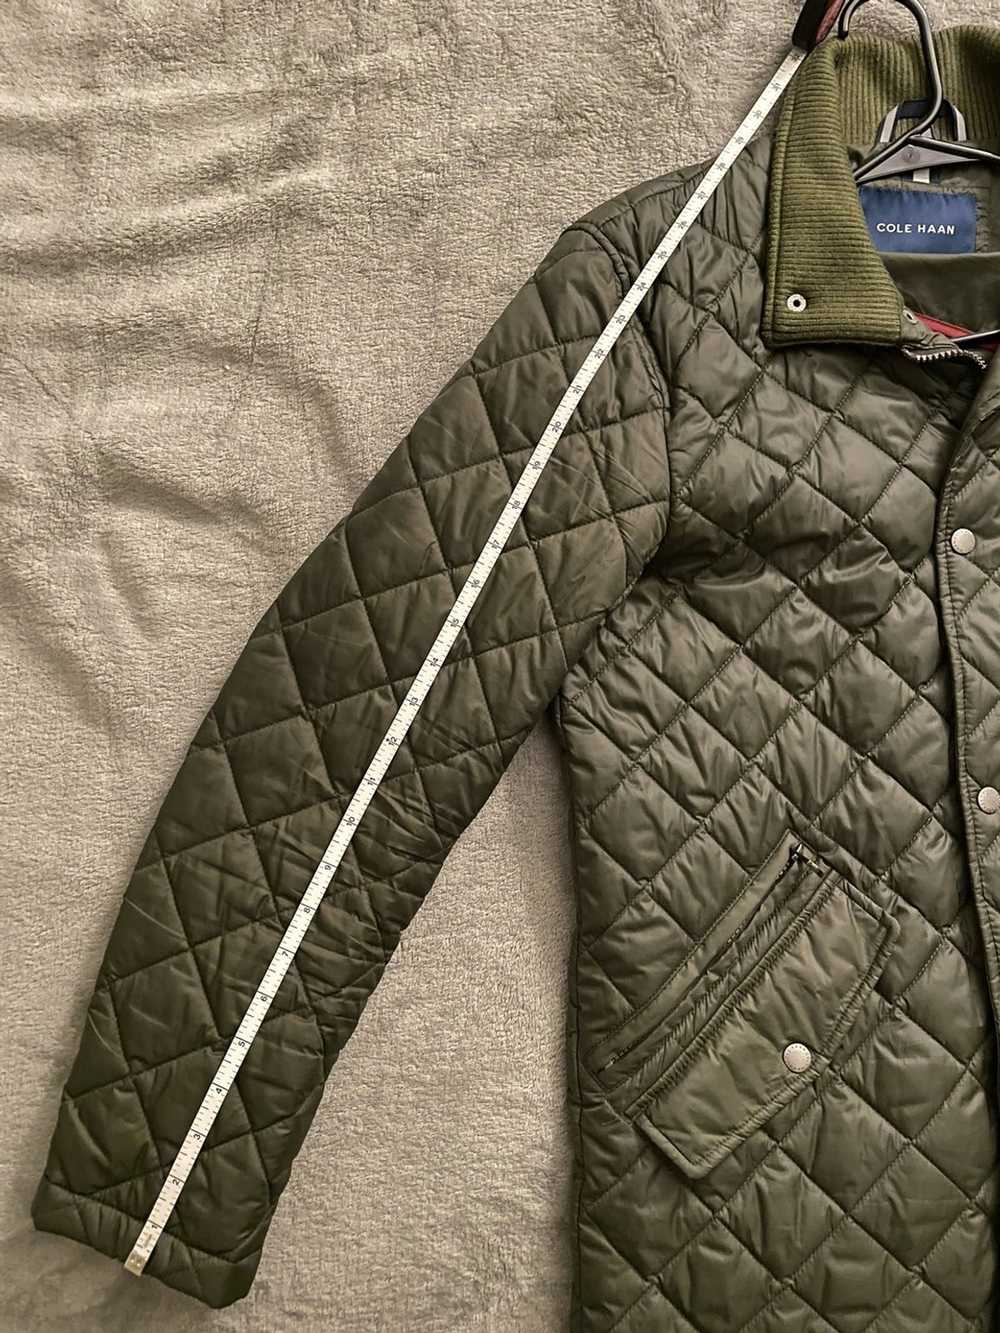 Cole Haan Cole Haan Nylon Quilted Barn Jacket Wit… - image 5